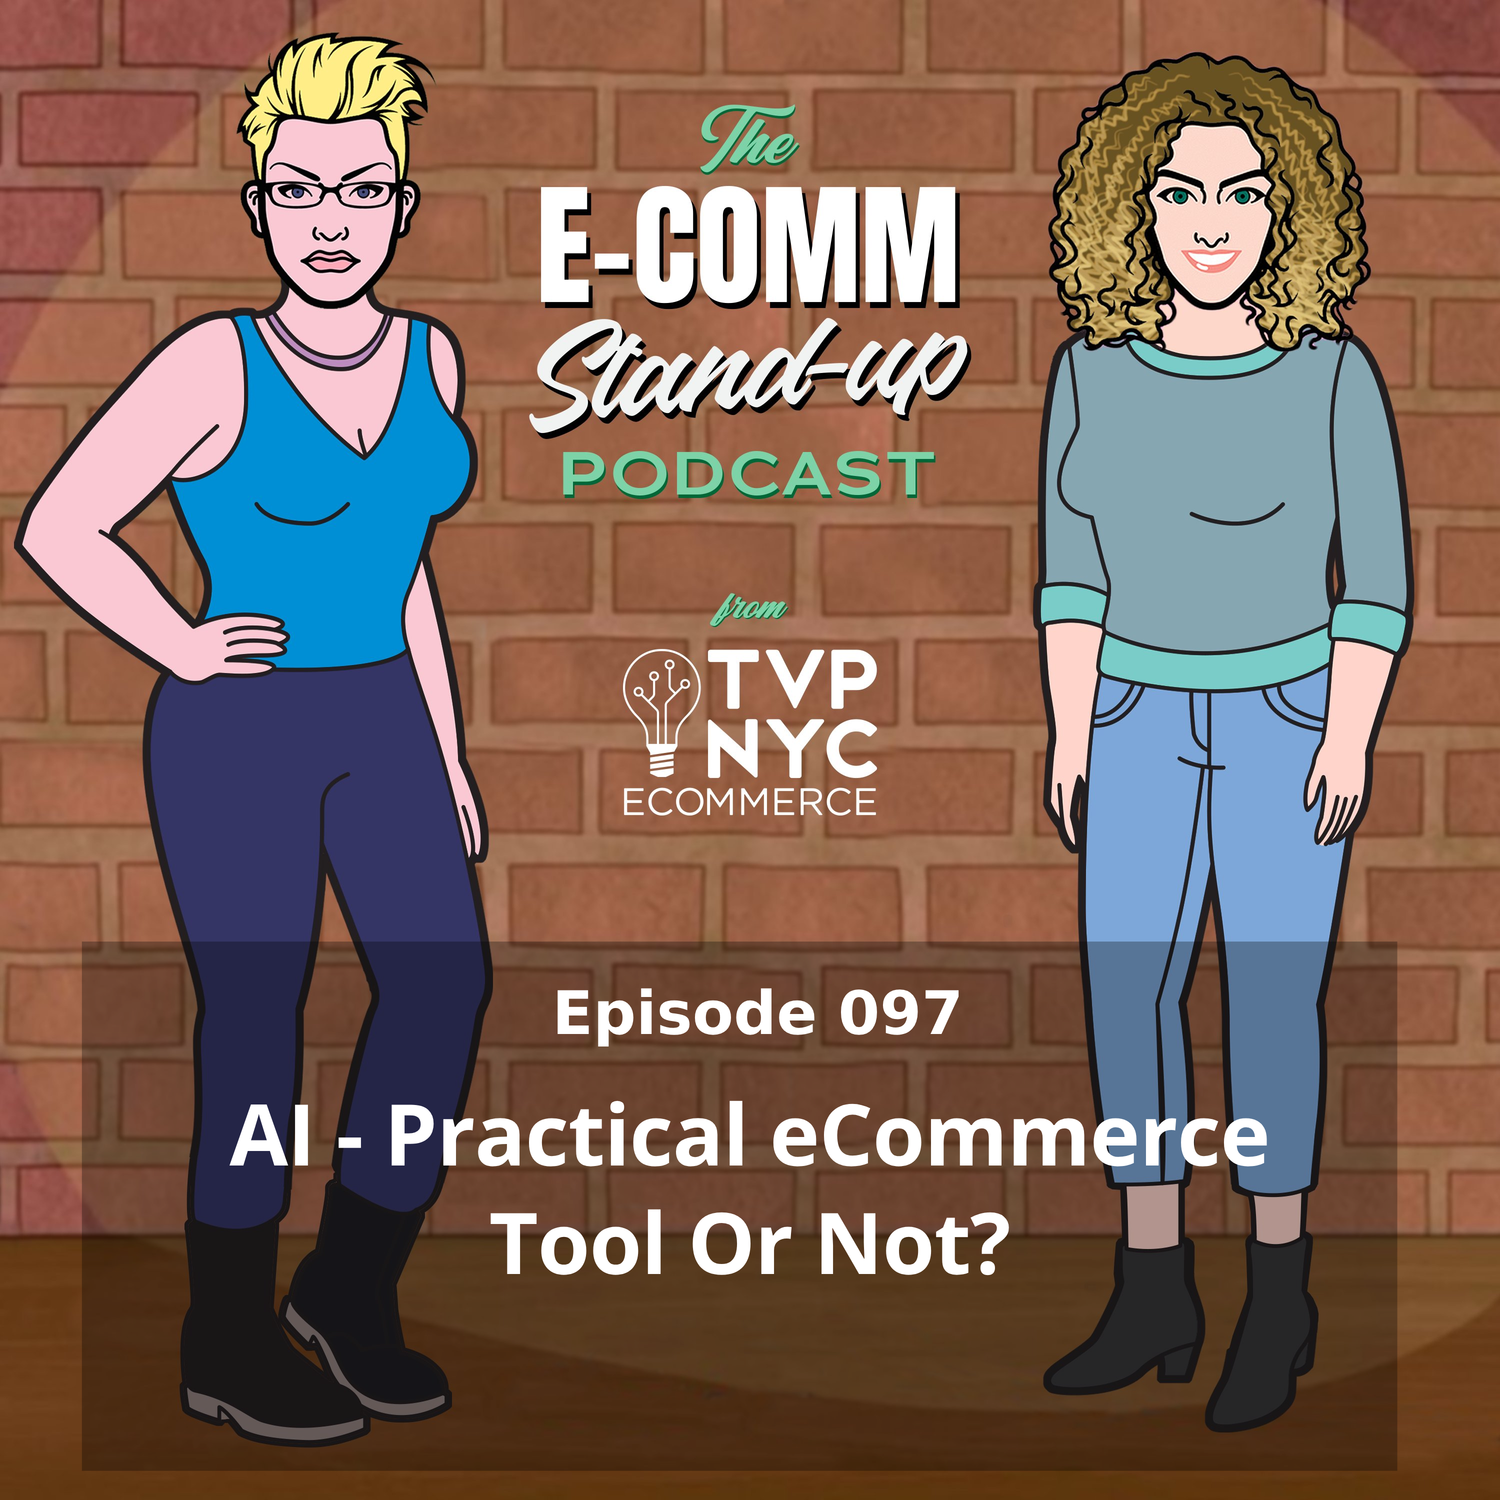 AI - Practical eCommerce Tool Or Not?